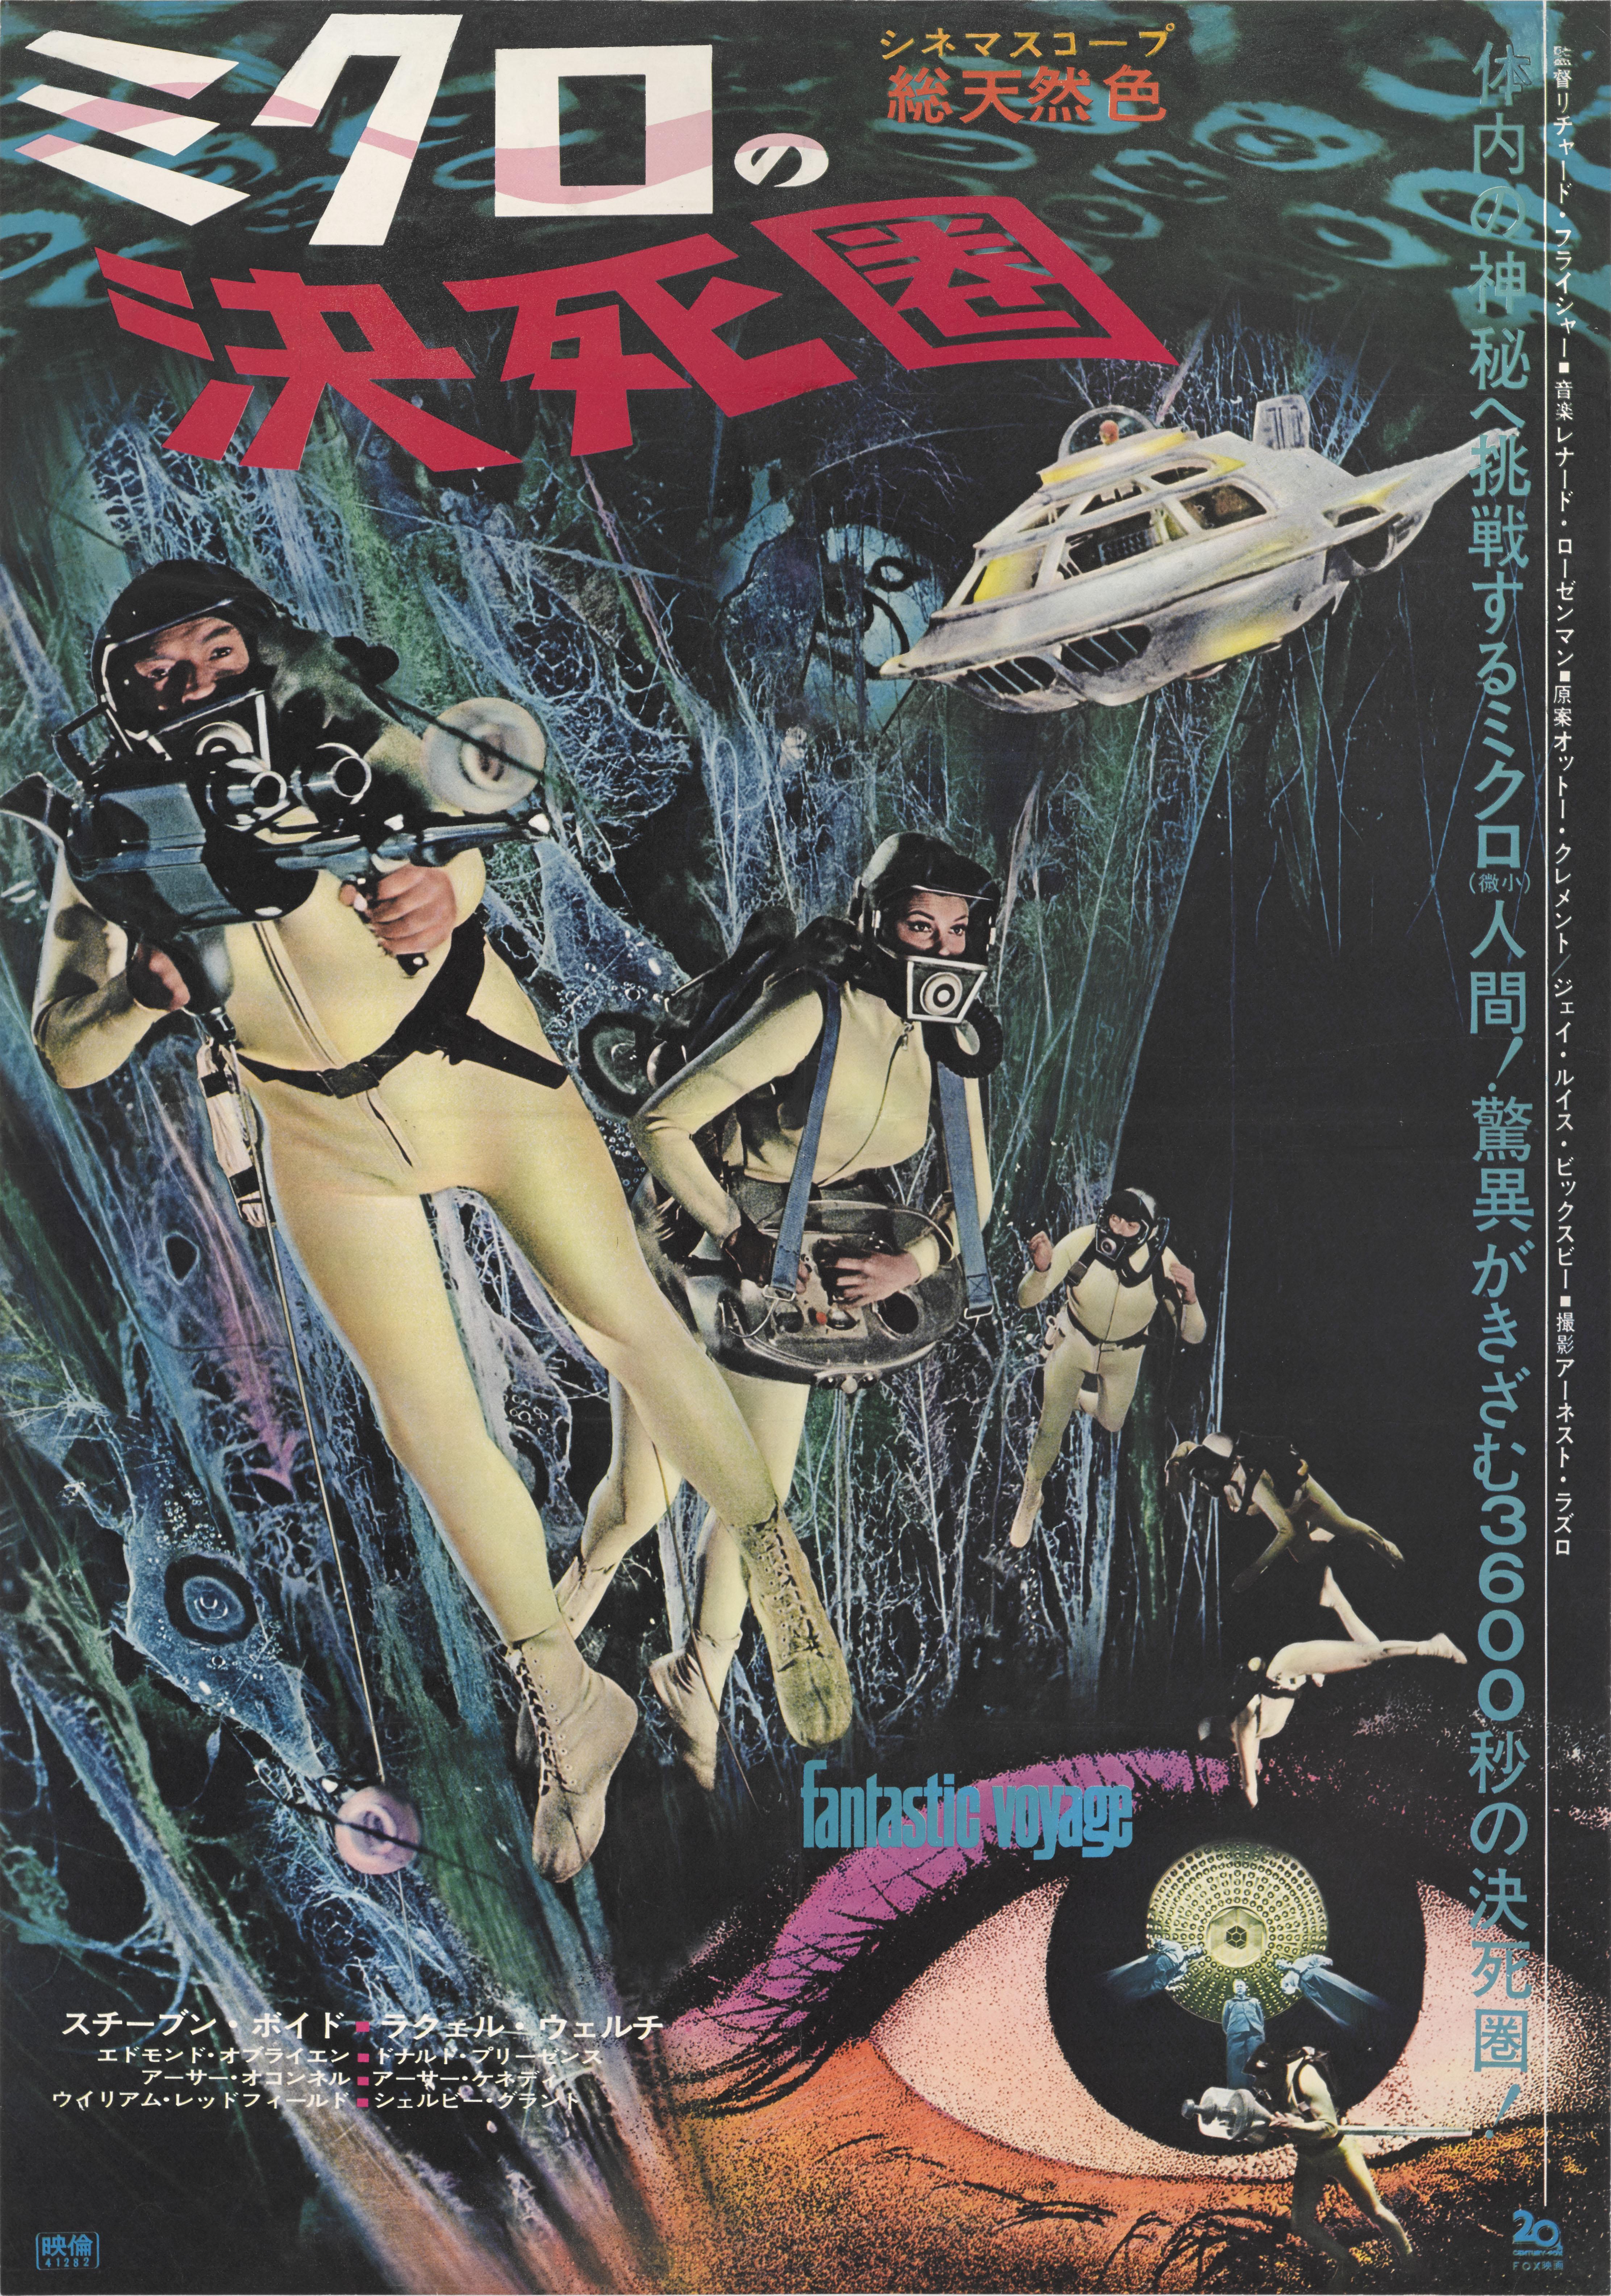 Original Japanese film poster for the 1966 science fiction film directed by Richard Fleischer, and starring Stephen Boyd and Raquel Welch. The fabulous artwork is unique to the Japanese poster.
This poster is conservation linen backed and it would